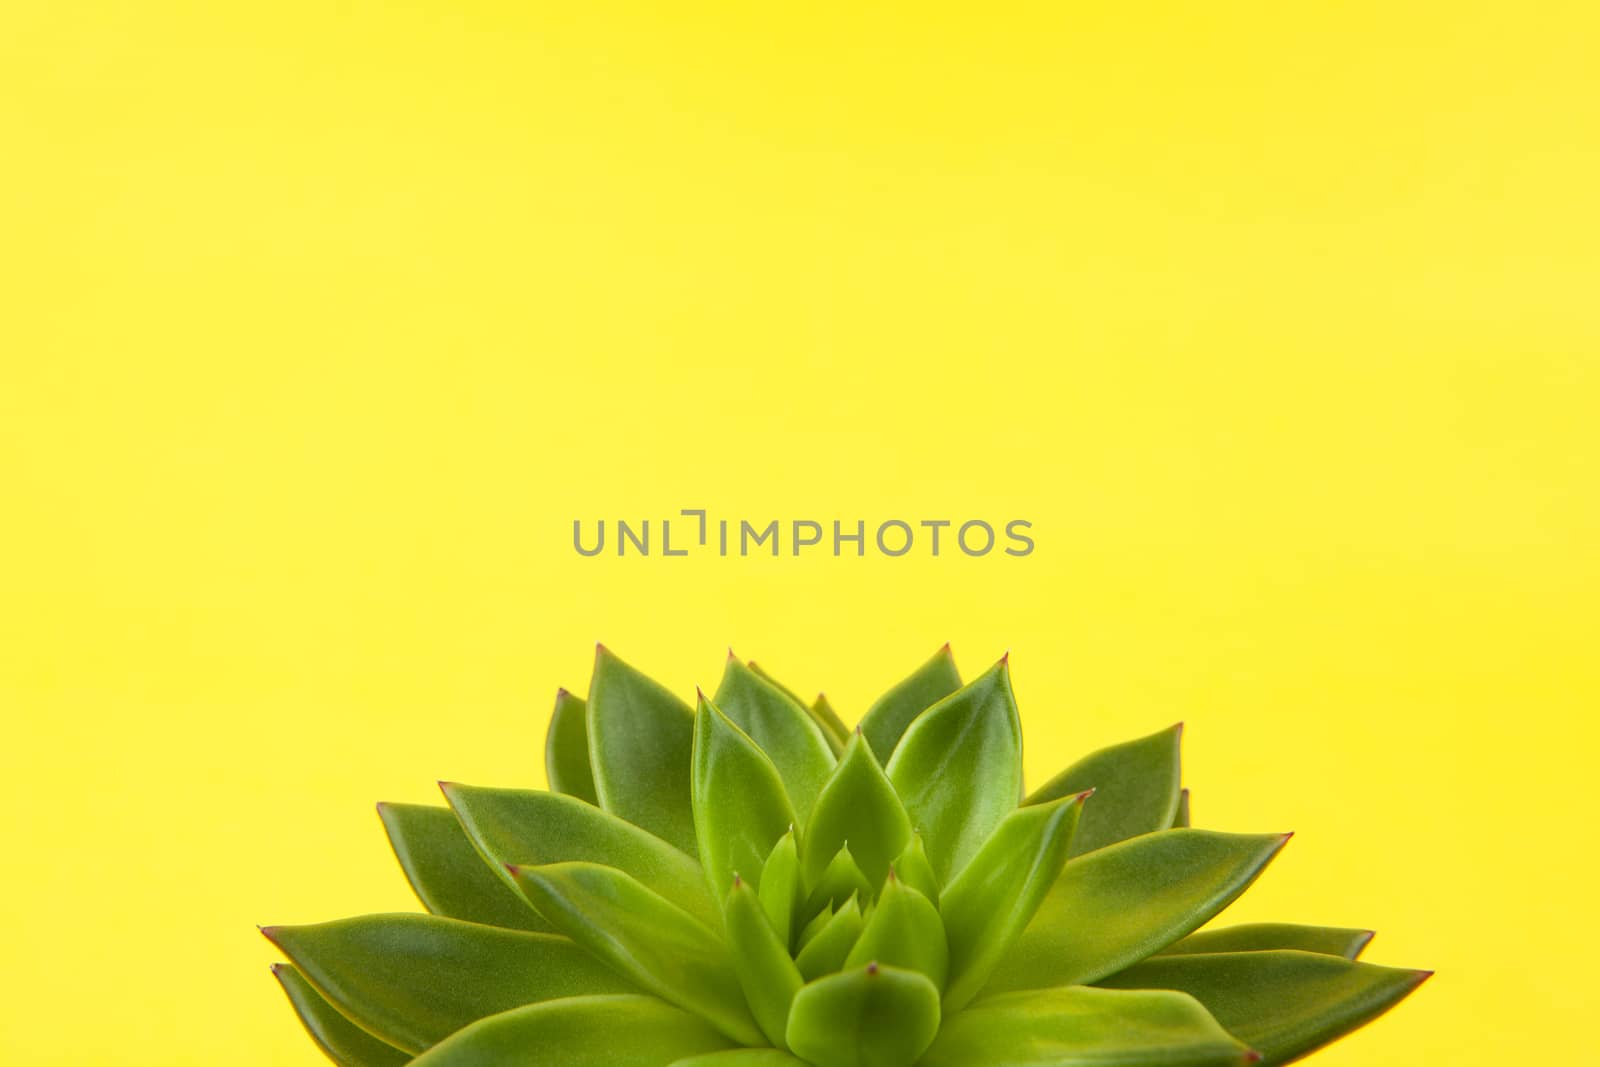 Trendy succulent Haworthia cymbiformis closeup on yellow background, copy space, macro. For social media, poster, interior, blog, flower shop, packing overfilling. Home gardening concept. Horizontal.